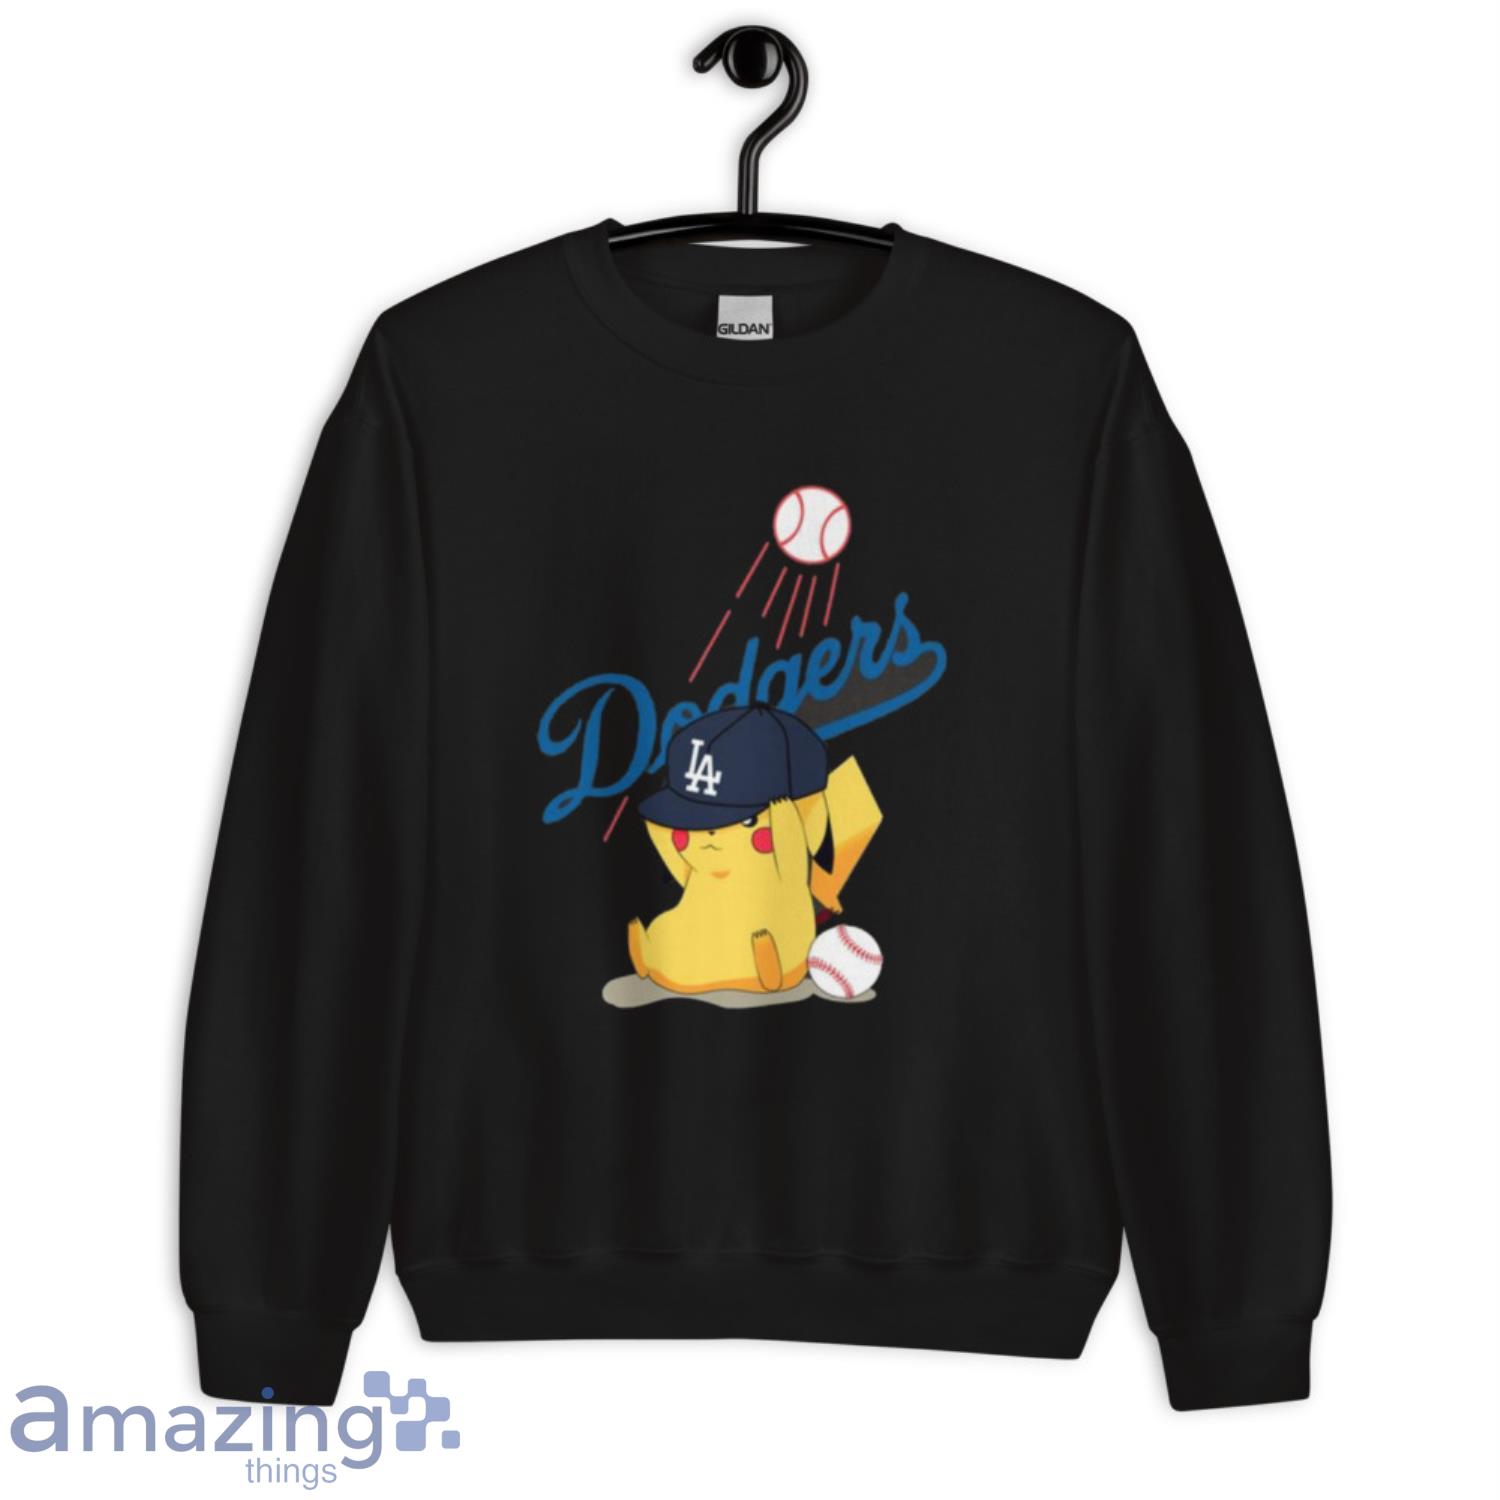 MLB, Shirts & Tops, New Youth Dodger Jersey Super Soft